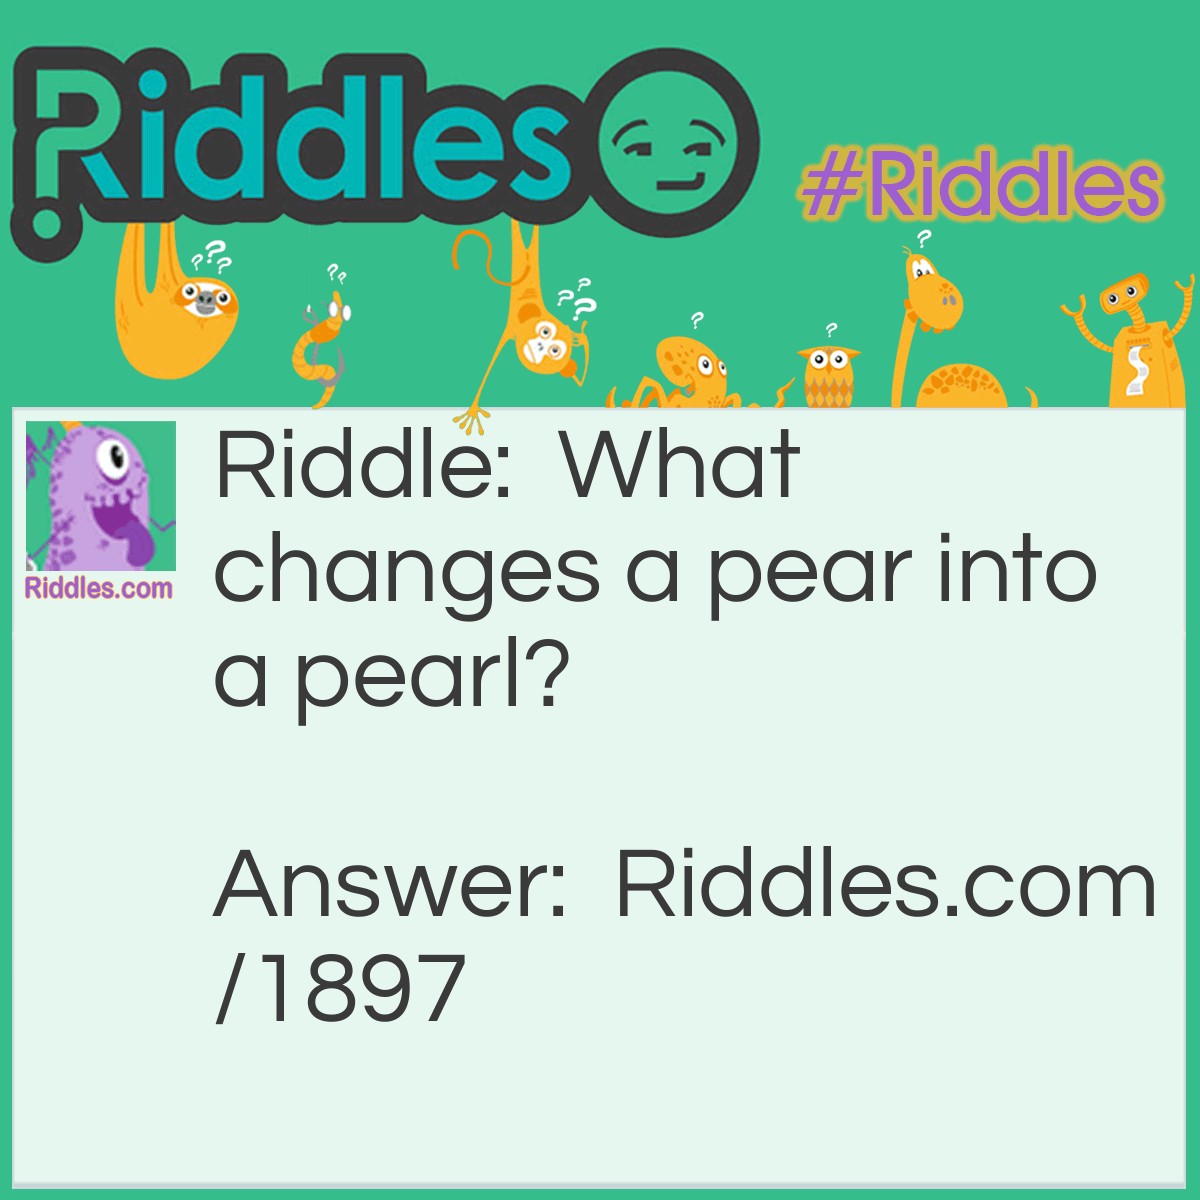 Riddle: What changes a pear into a pearl? Answer: The letter "L".